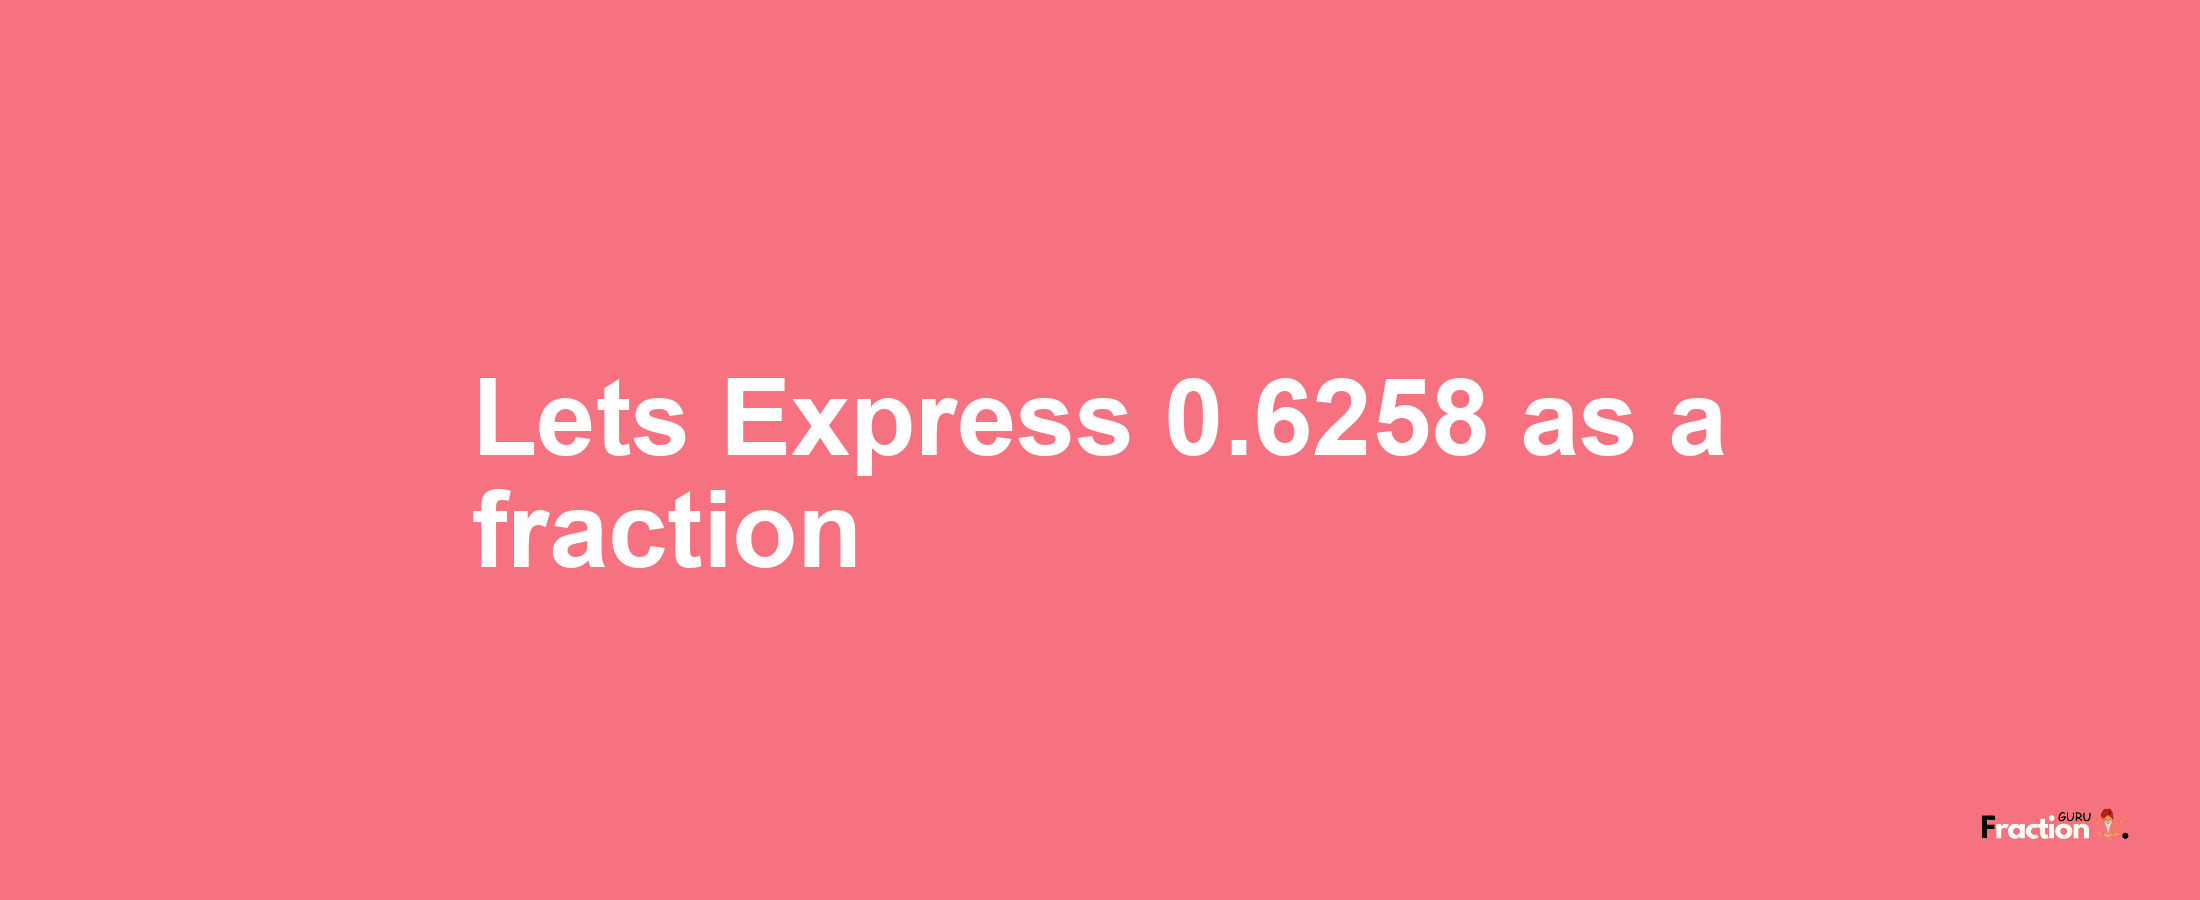 Lets Express 0.6258 as afraction